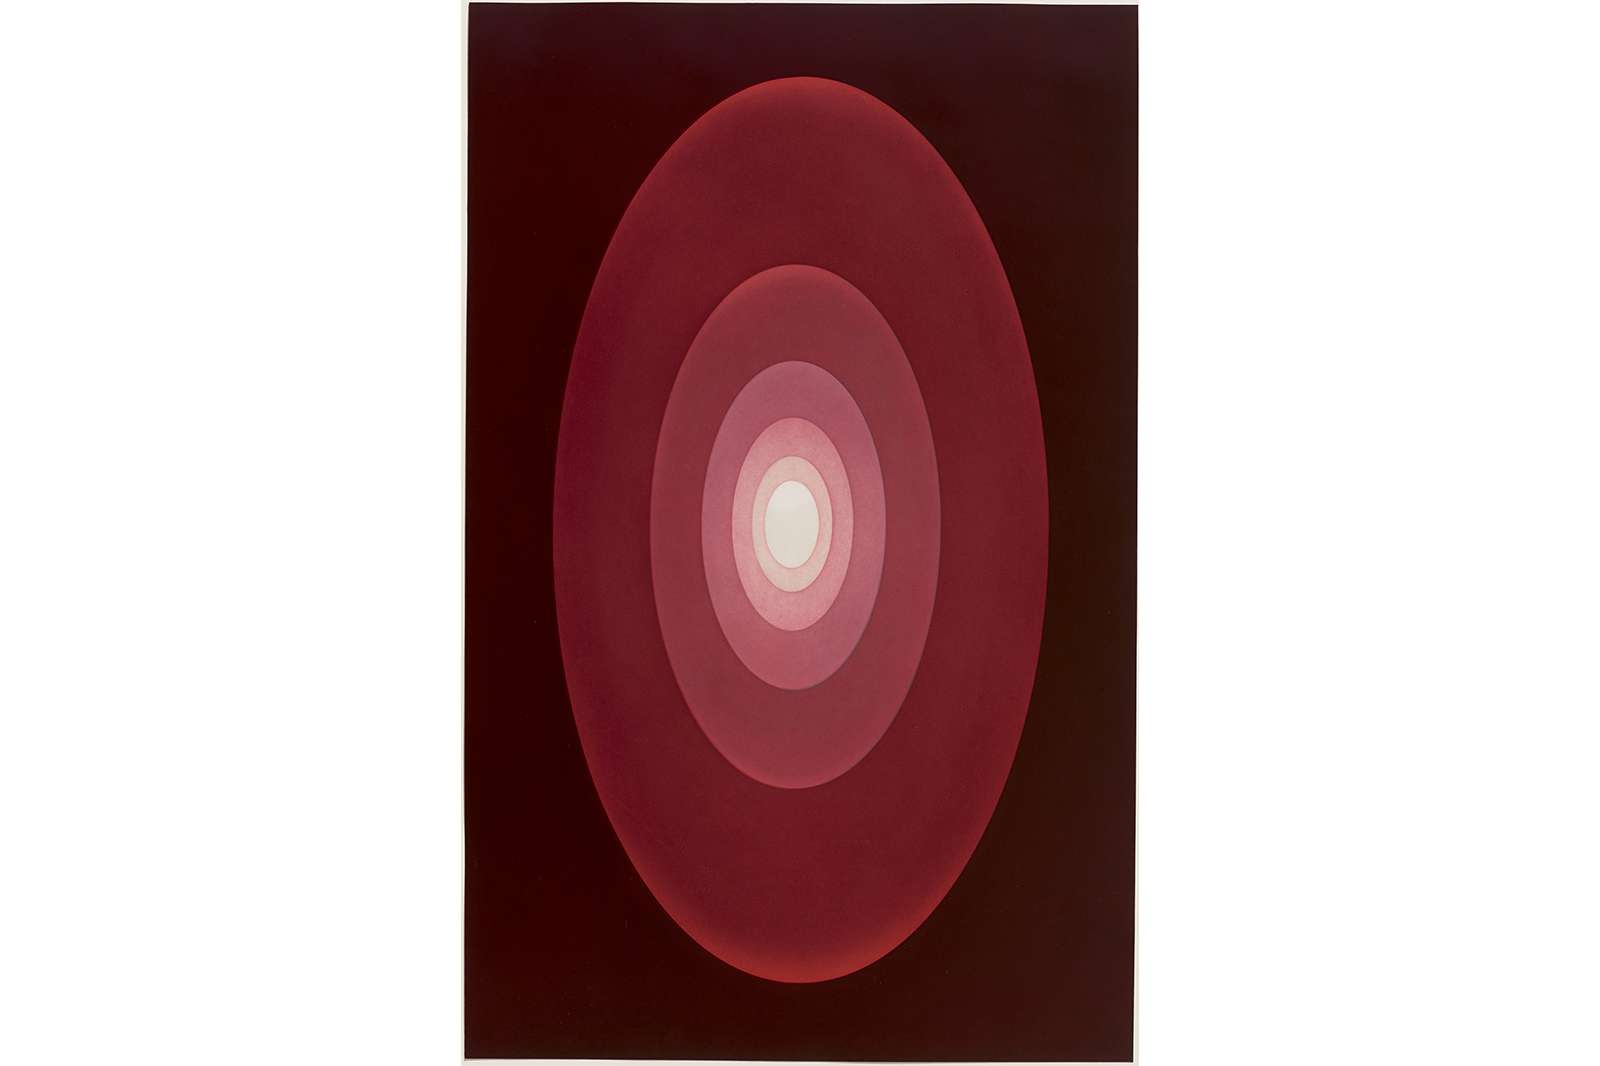 James Turrell, Meeting, 1989-90. Aquatint, 42 7/16 x 29 13/16 inches. Edition of 30.